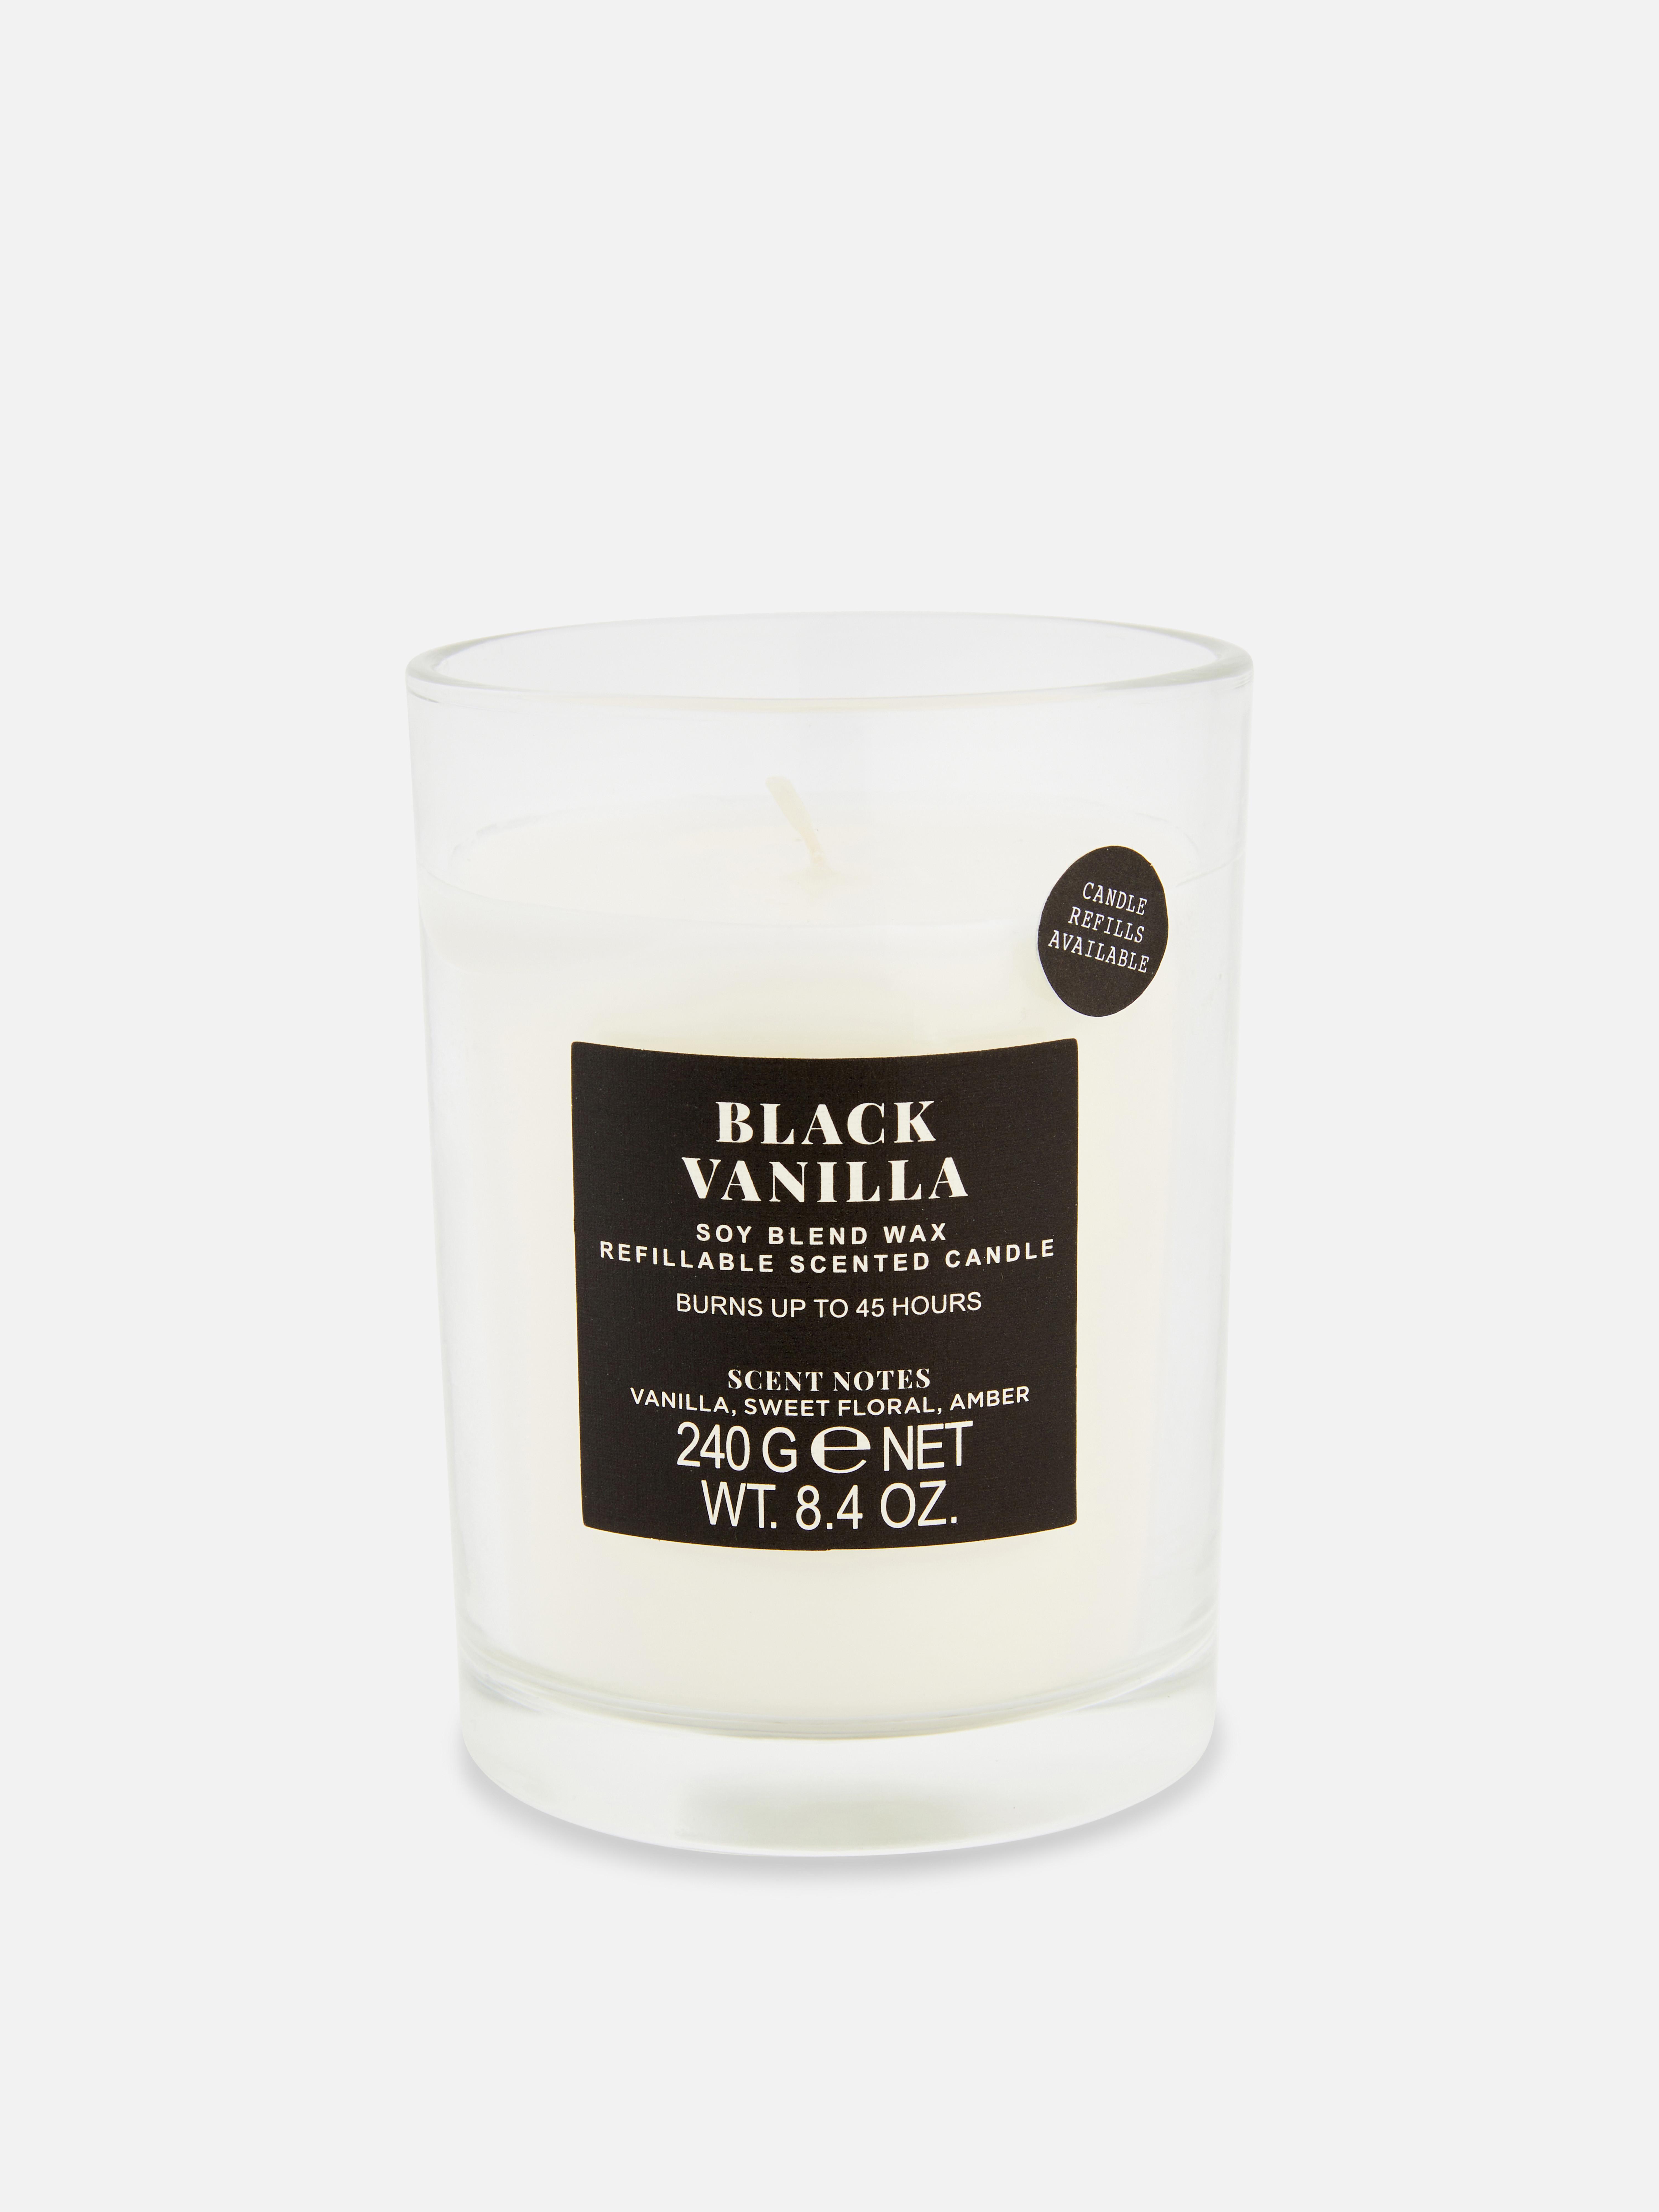 Refillable Scented Candle